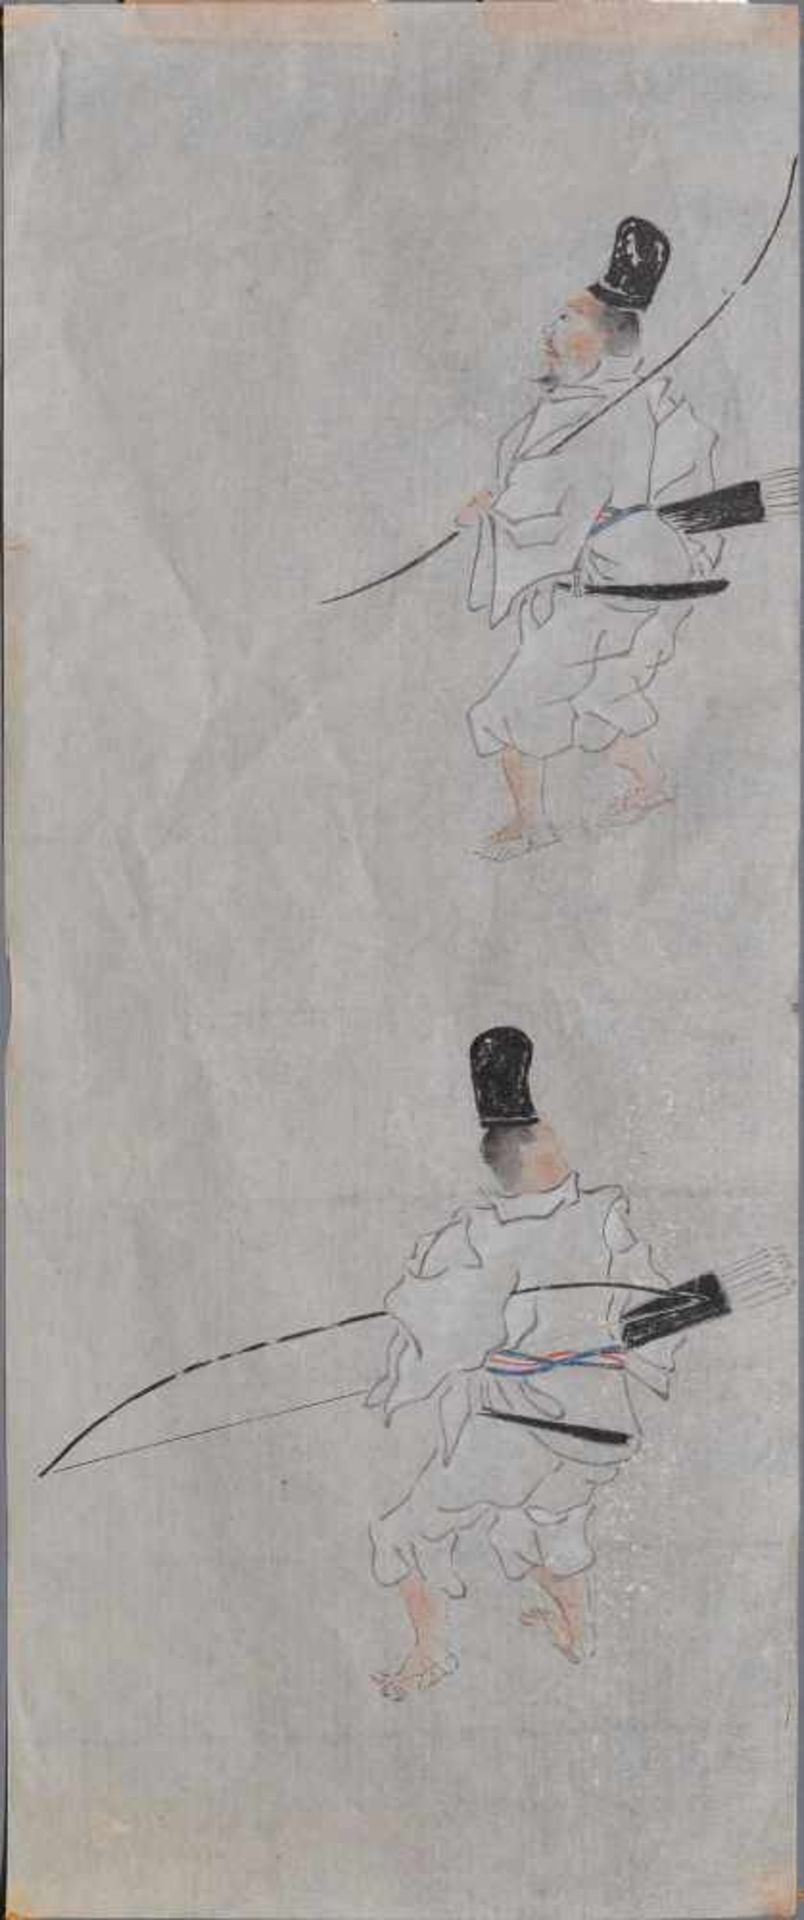 TWO SKETCHES FROM THE JAPANESE SCHOOL paper with ink and watercolor. Japan, 19th cent.SIZES 34,5 x - Image 2 of 3